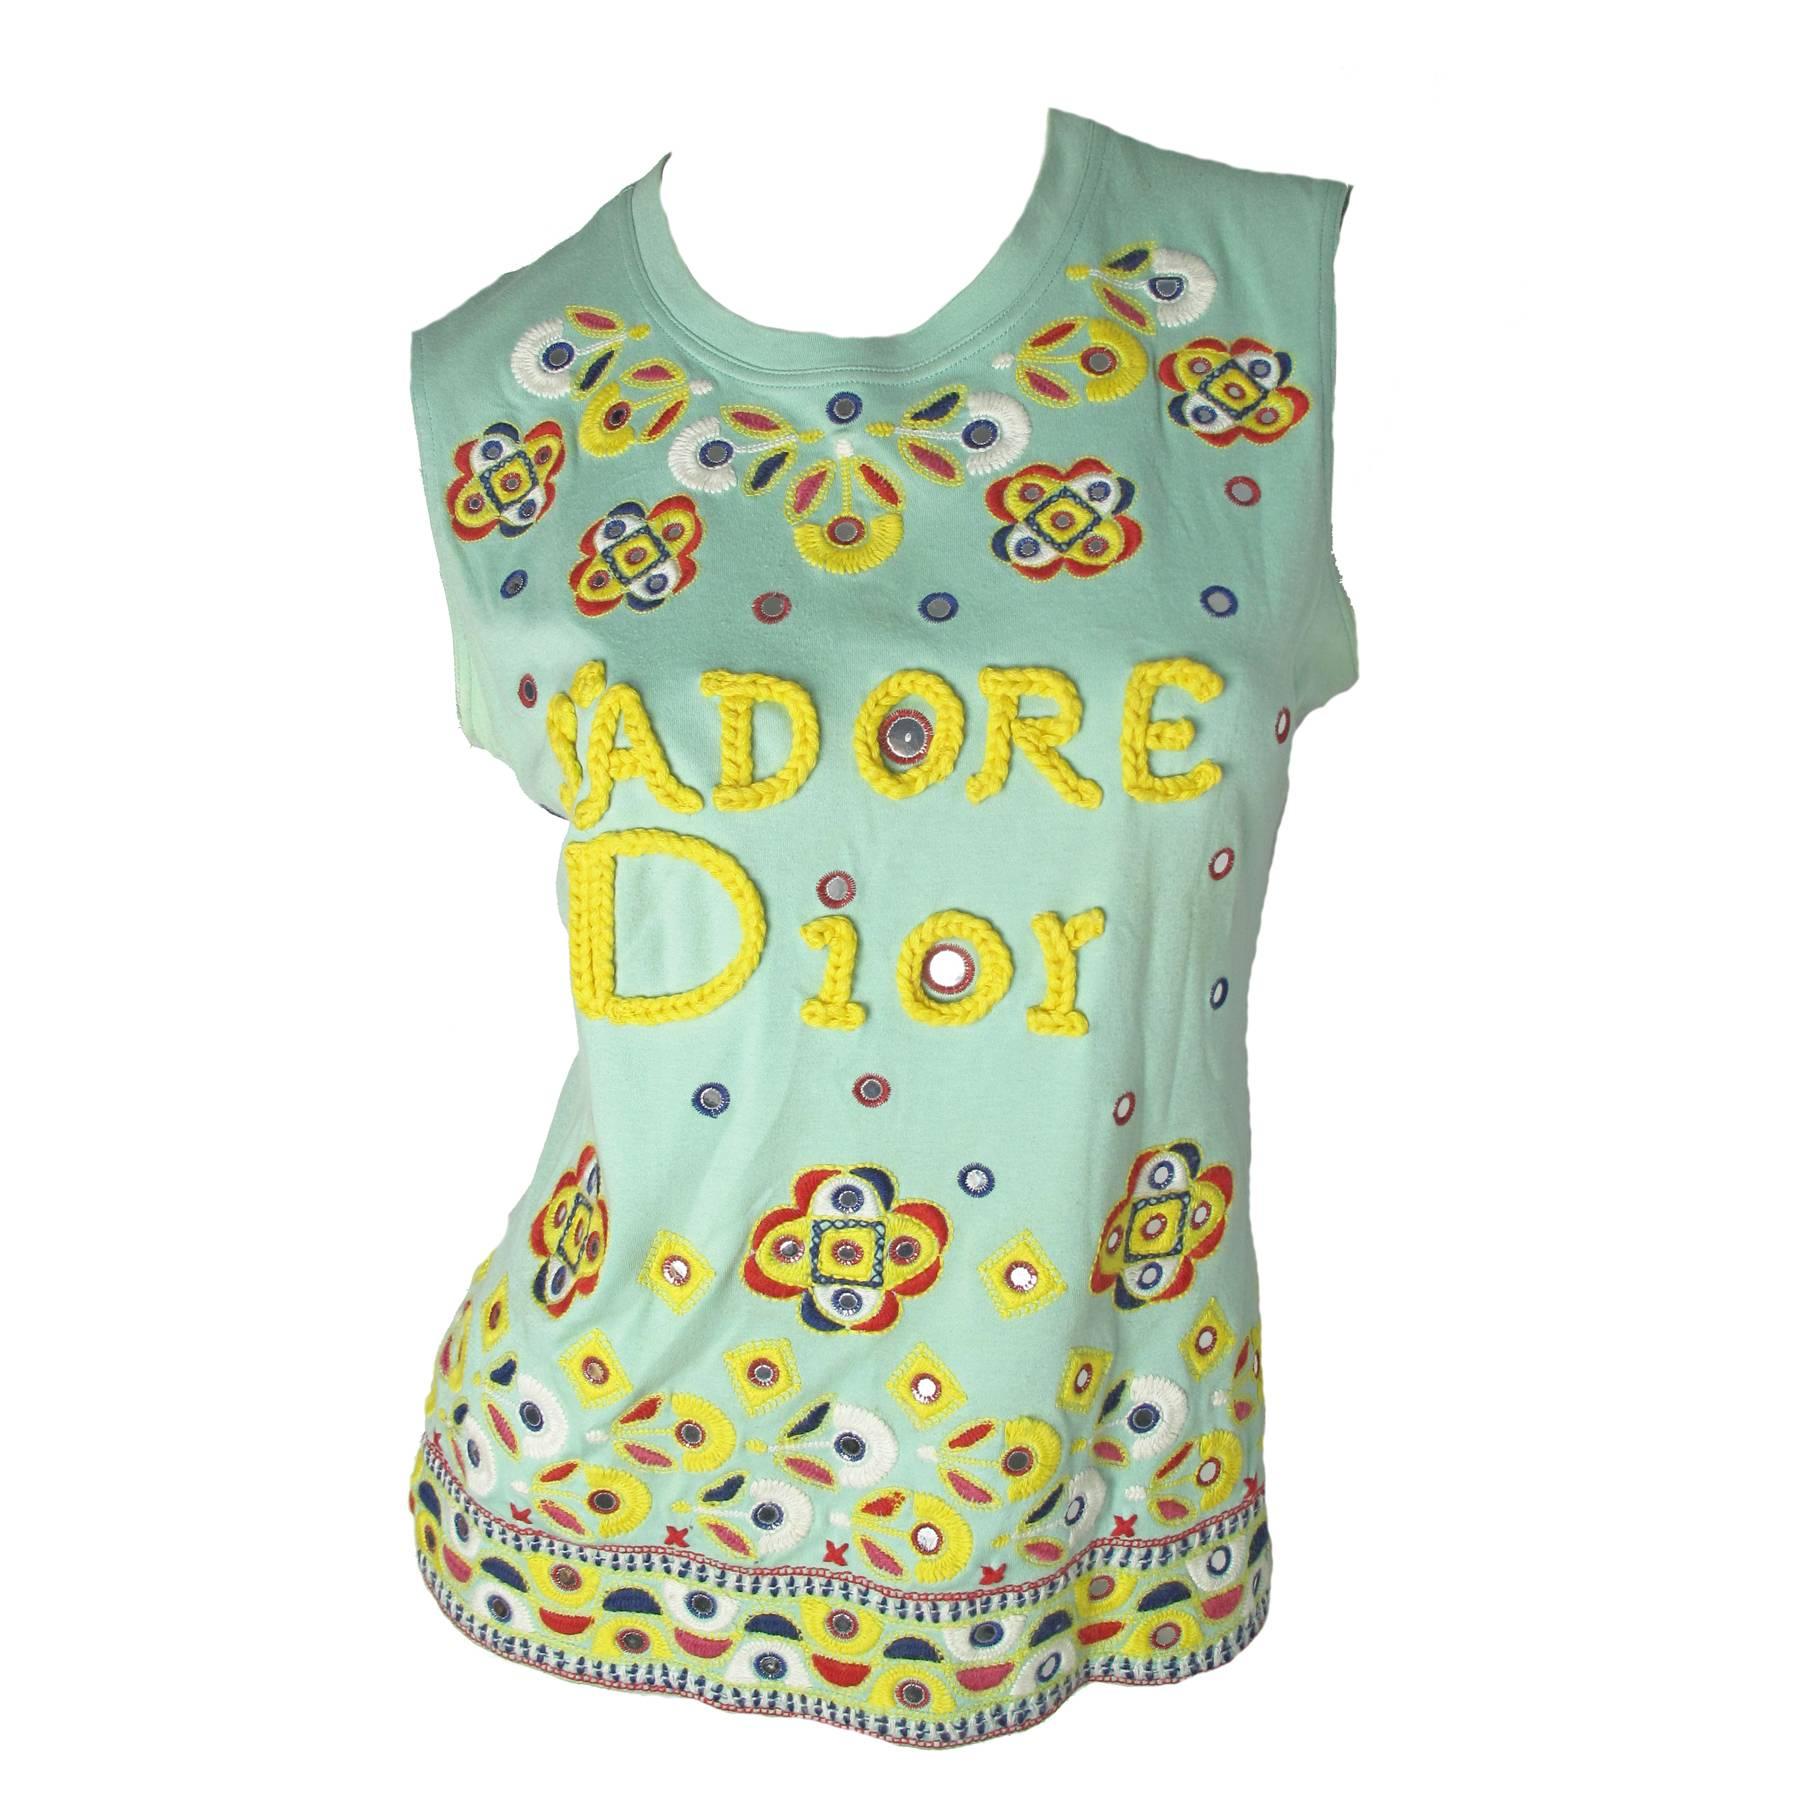 Christian Dior J'adore Dior Embroidered Tee - sale